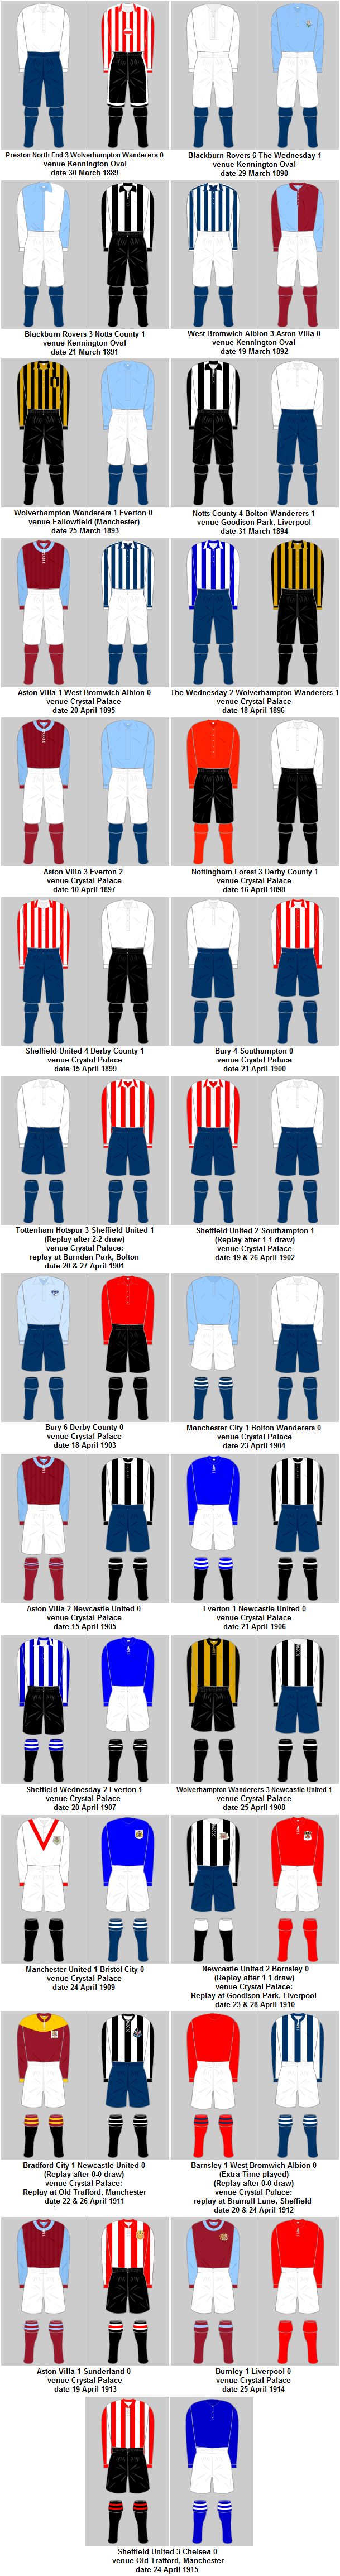 FA Cup Final Playing Kits 1888-89 to 1914-15